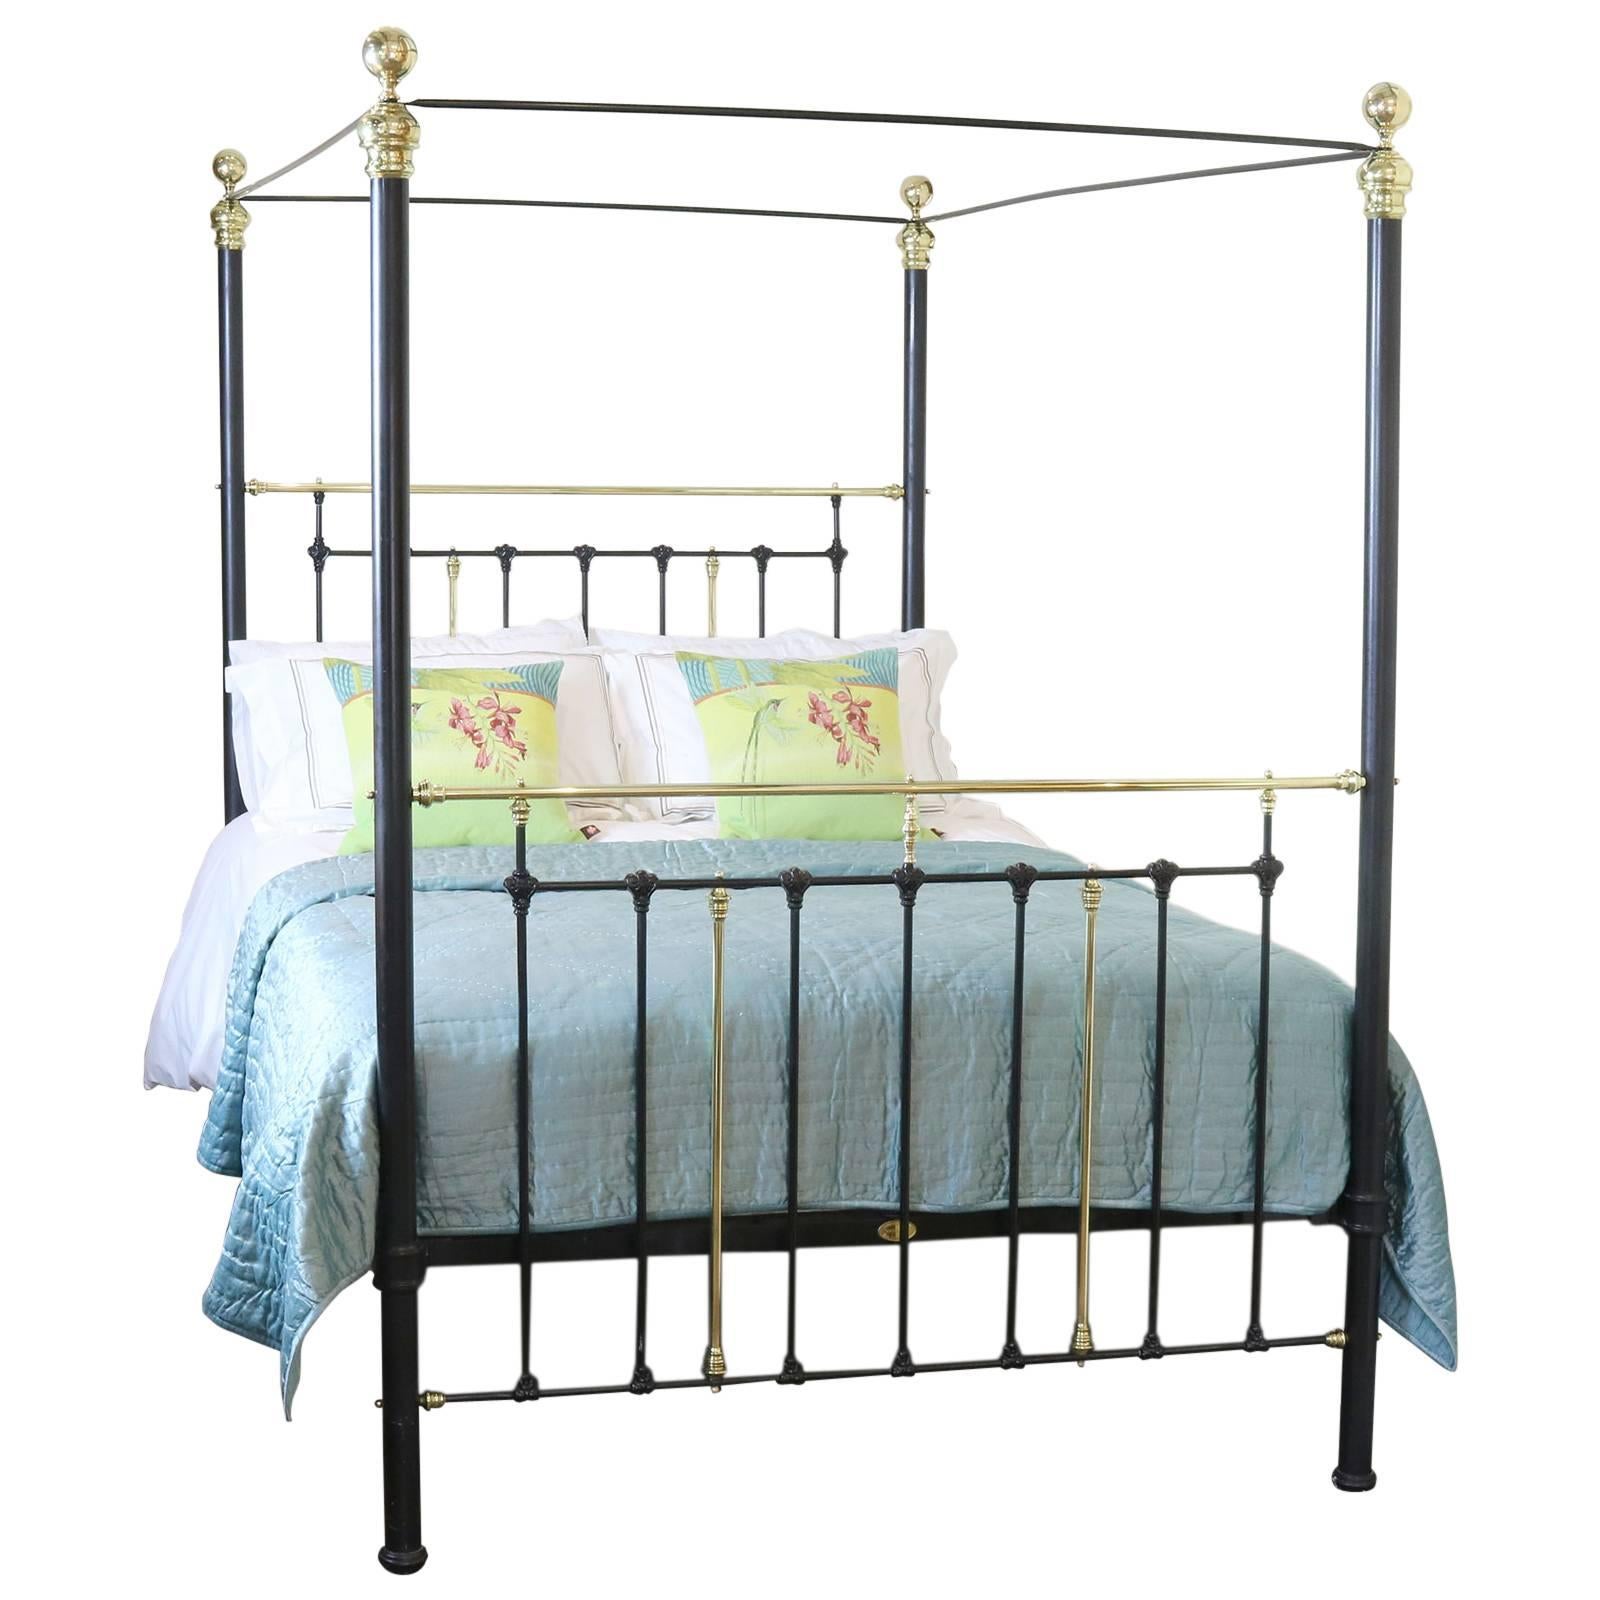 60 inches Wide Four-Poster Bed